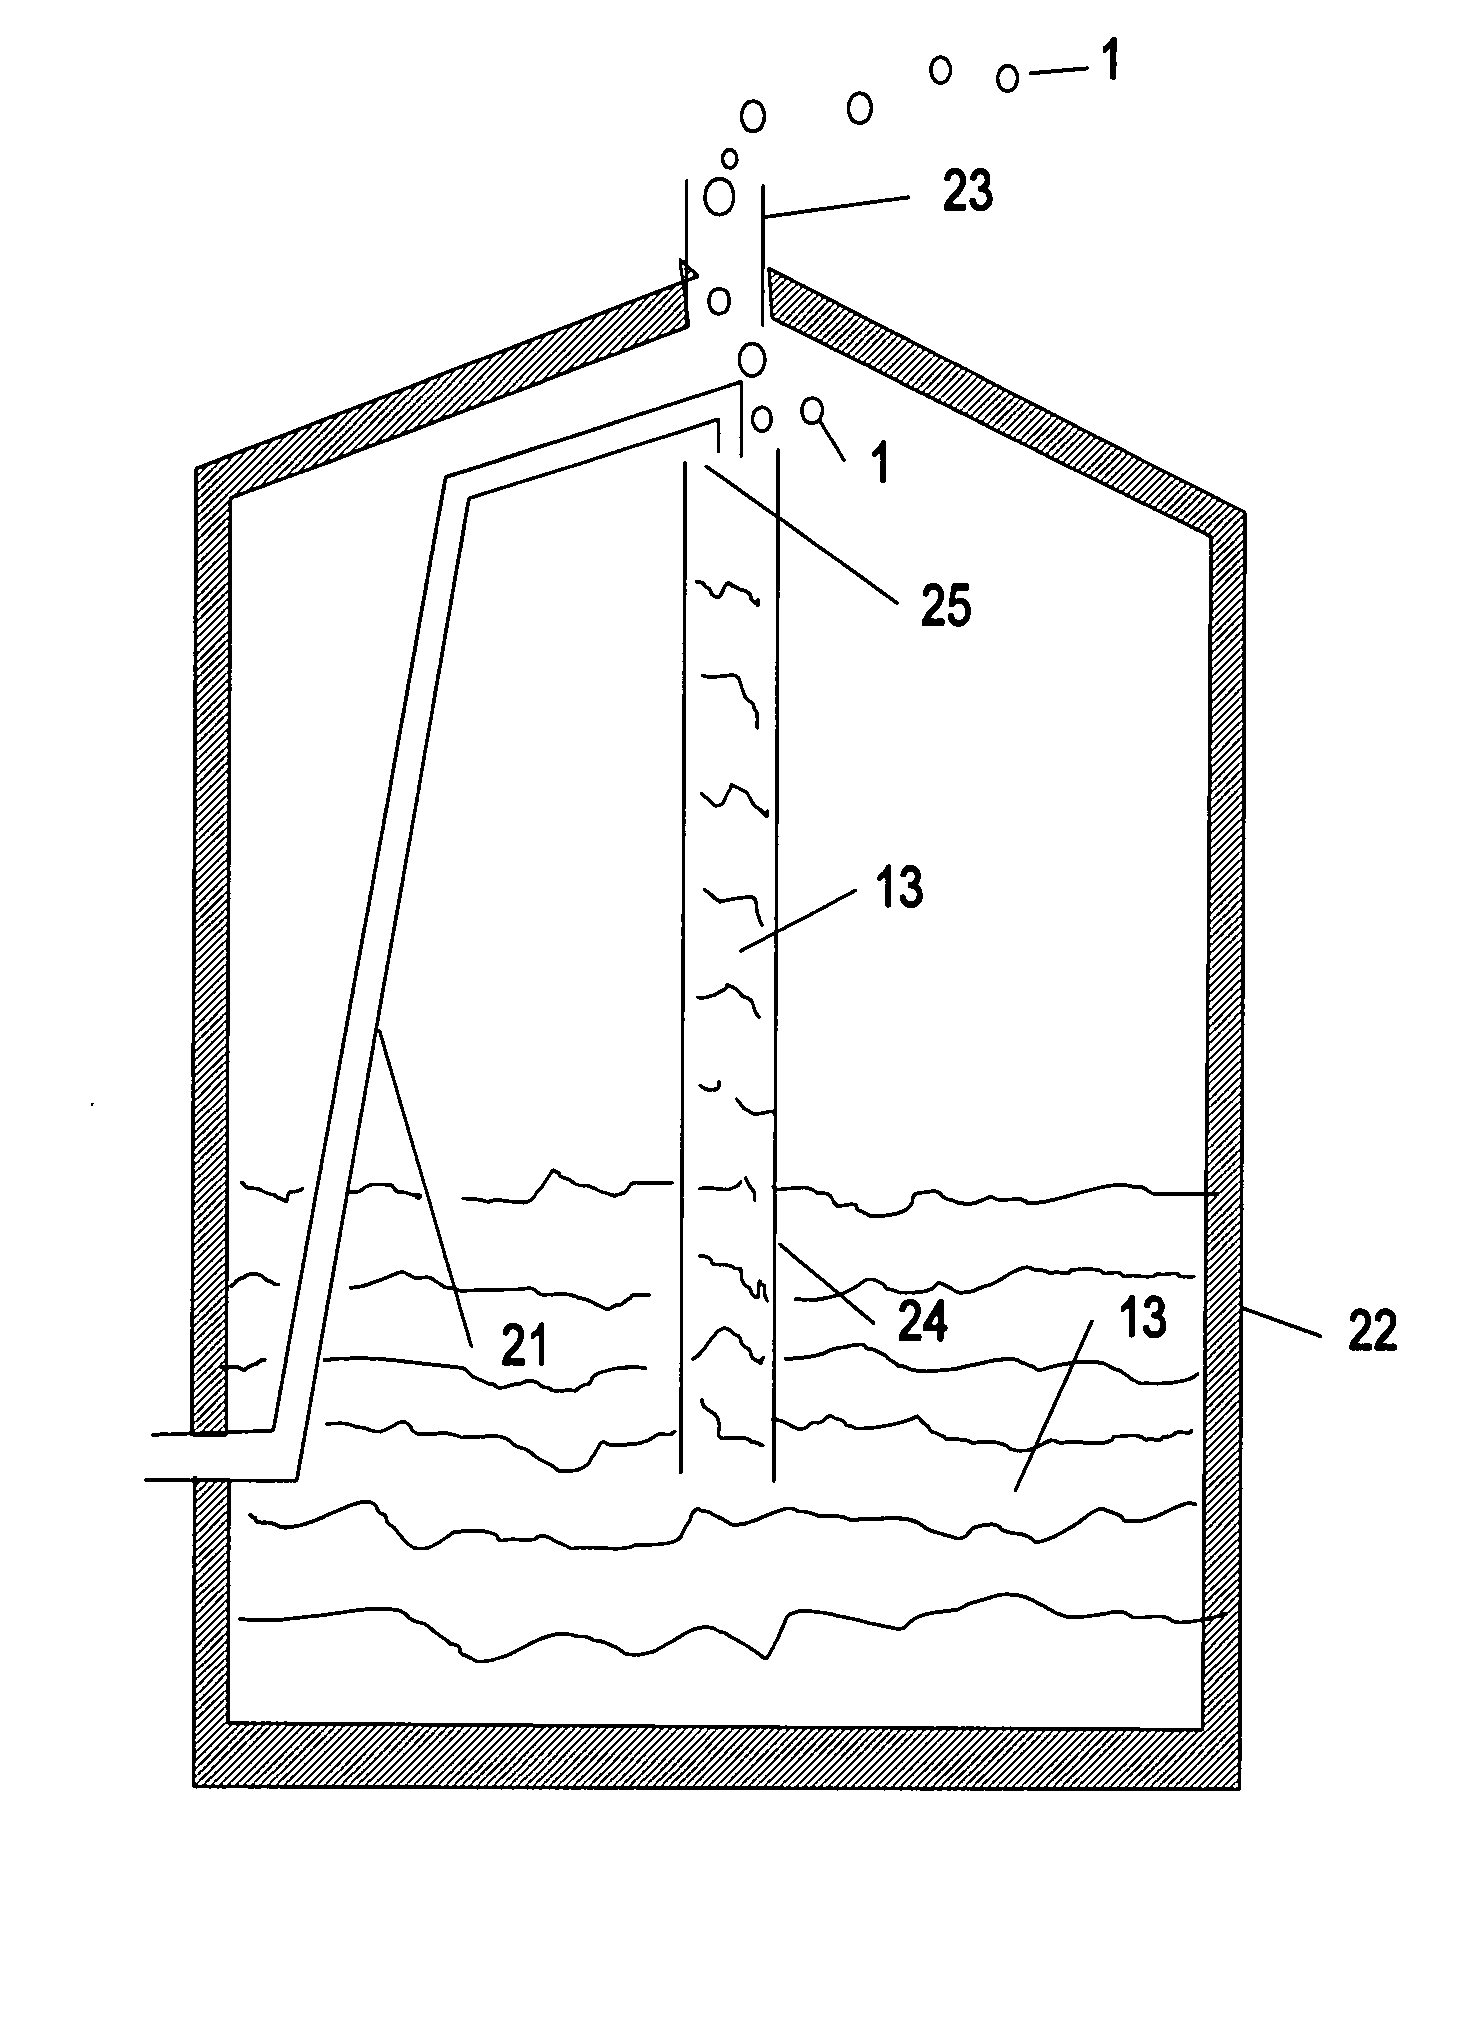 Hydrocarbon production system and method of use